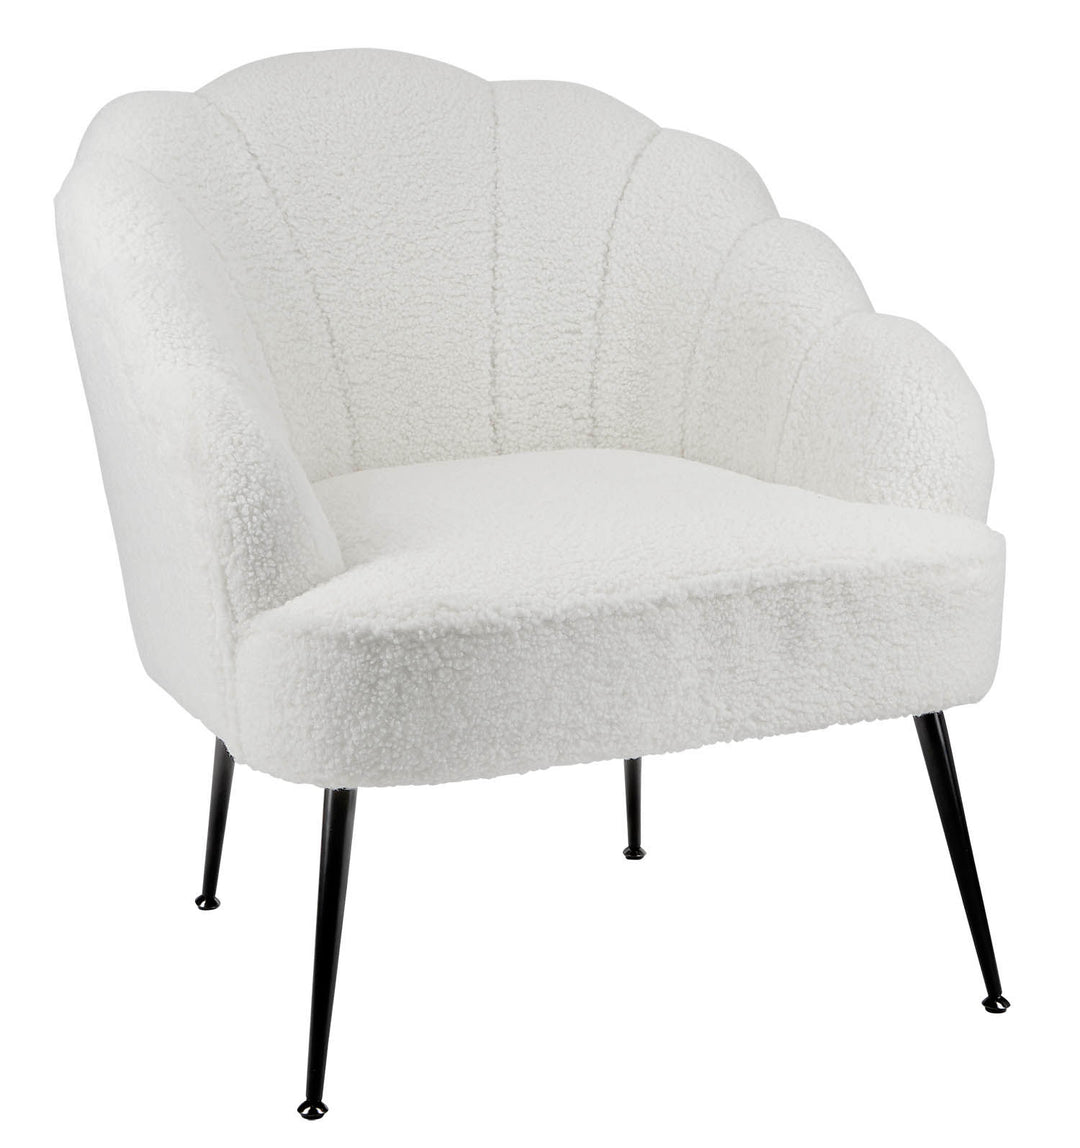 Bahne Lounge chair clam terry